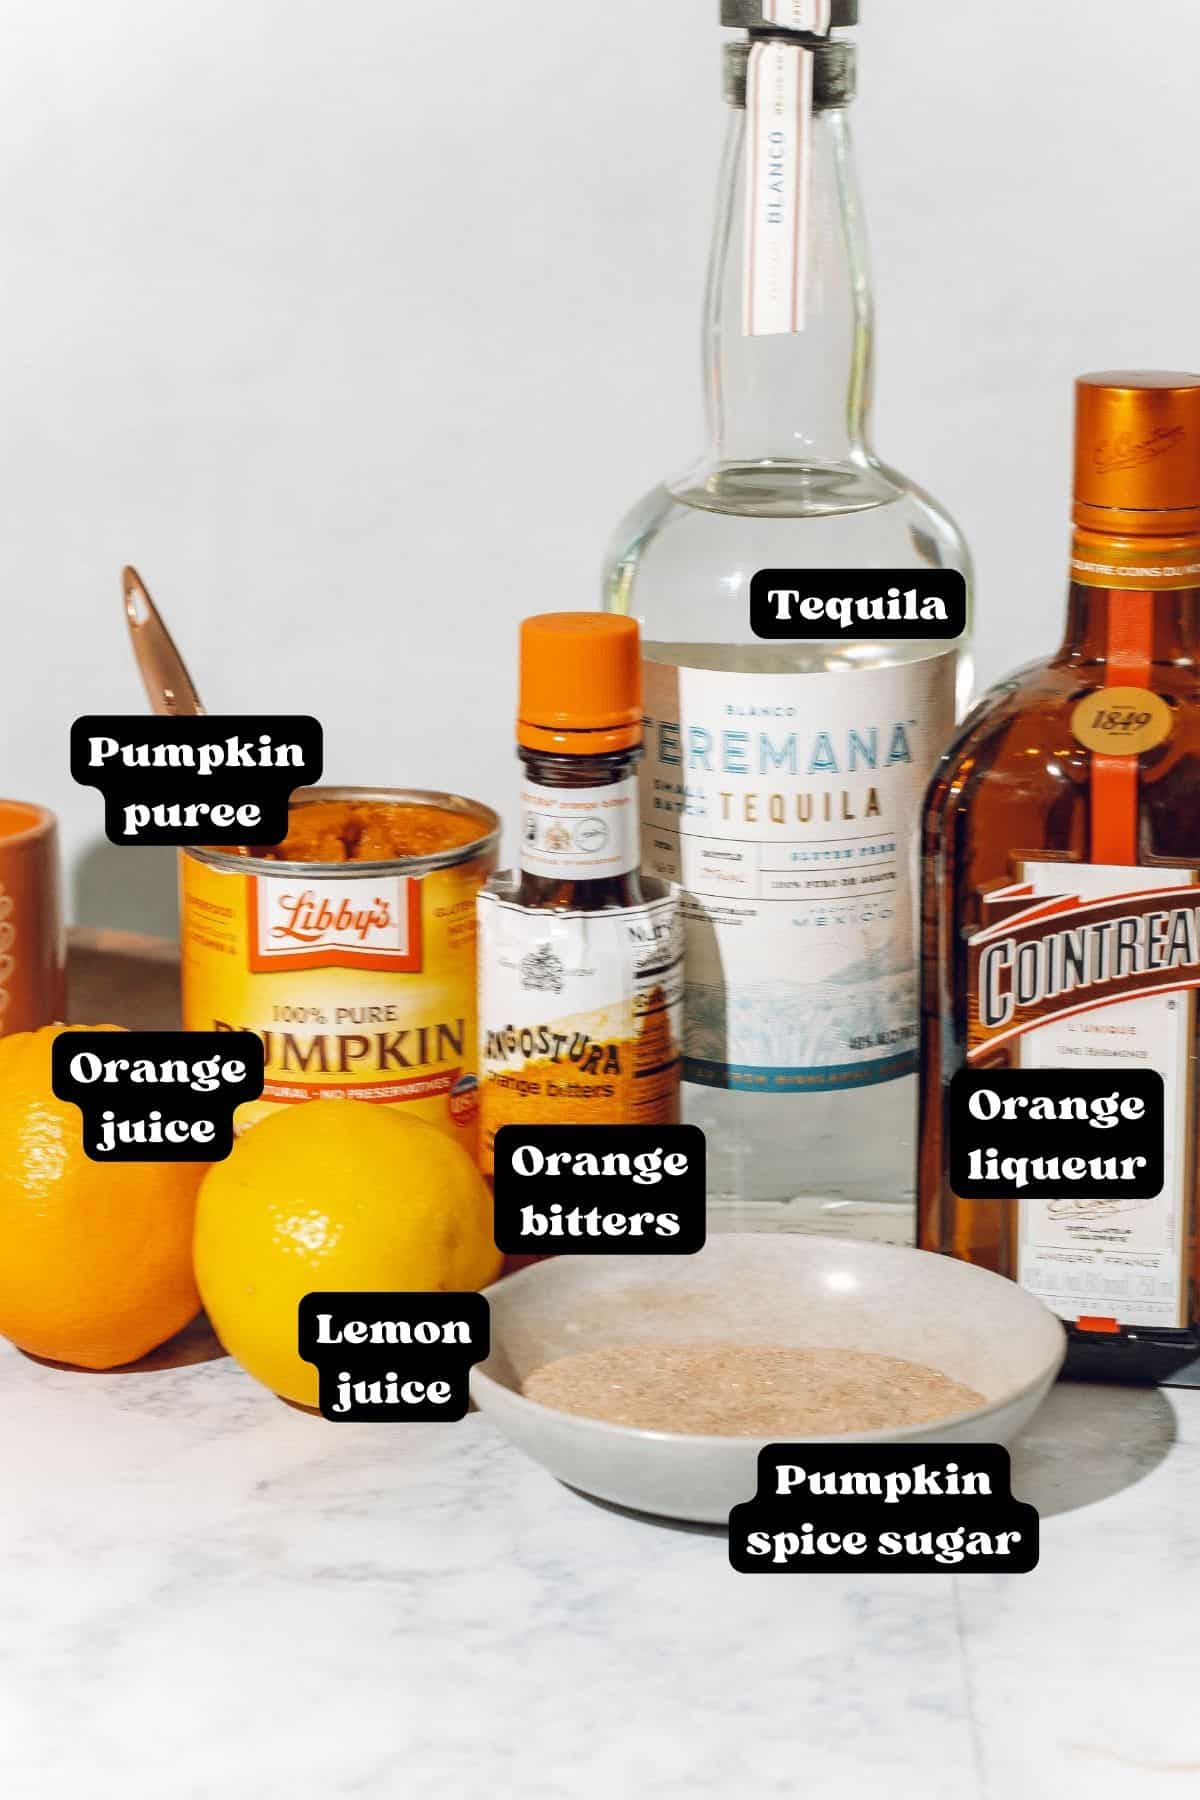 Ingredients for a pumpkin spice margarita on a white surface including tequila, cointreau, pumpkin spice sugar, bitters, pumpkin puree, and citrus fruits.